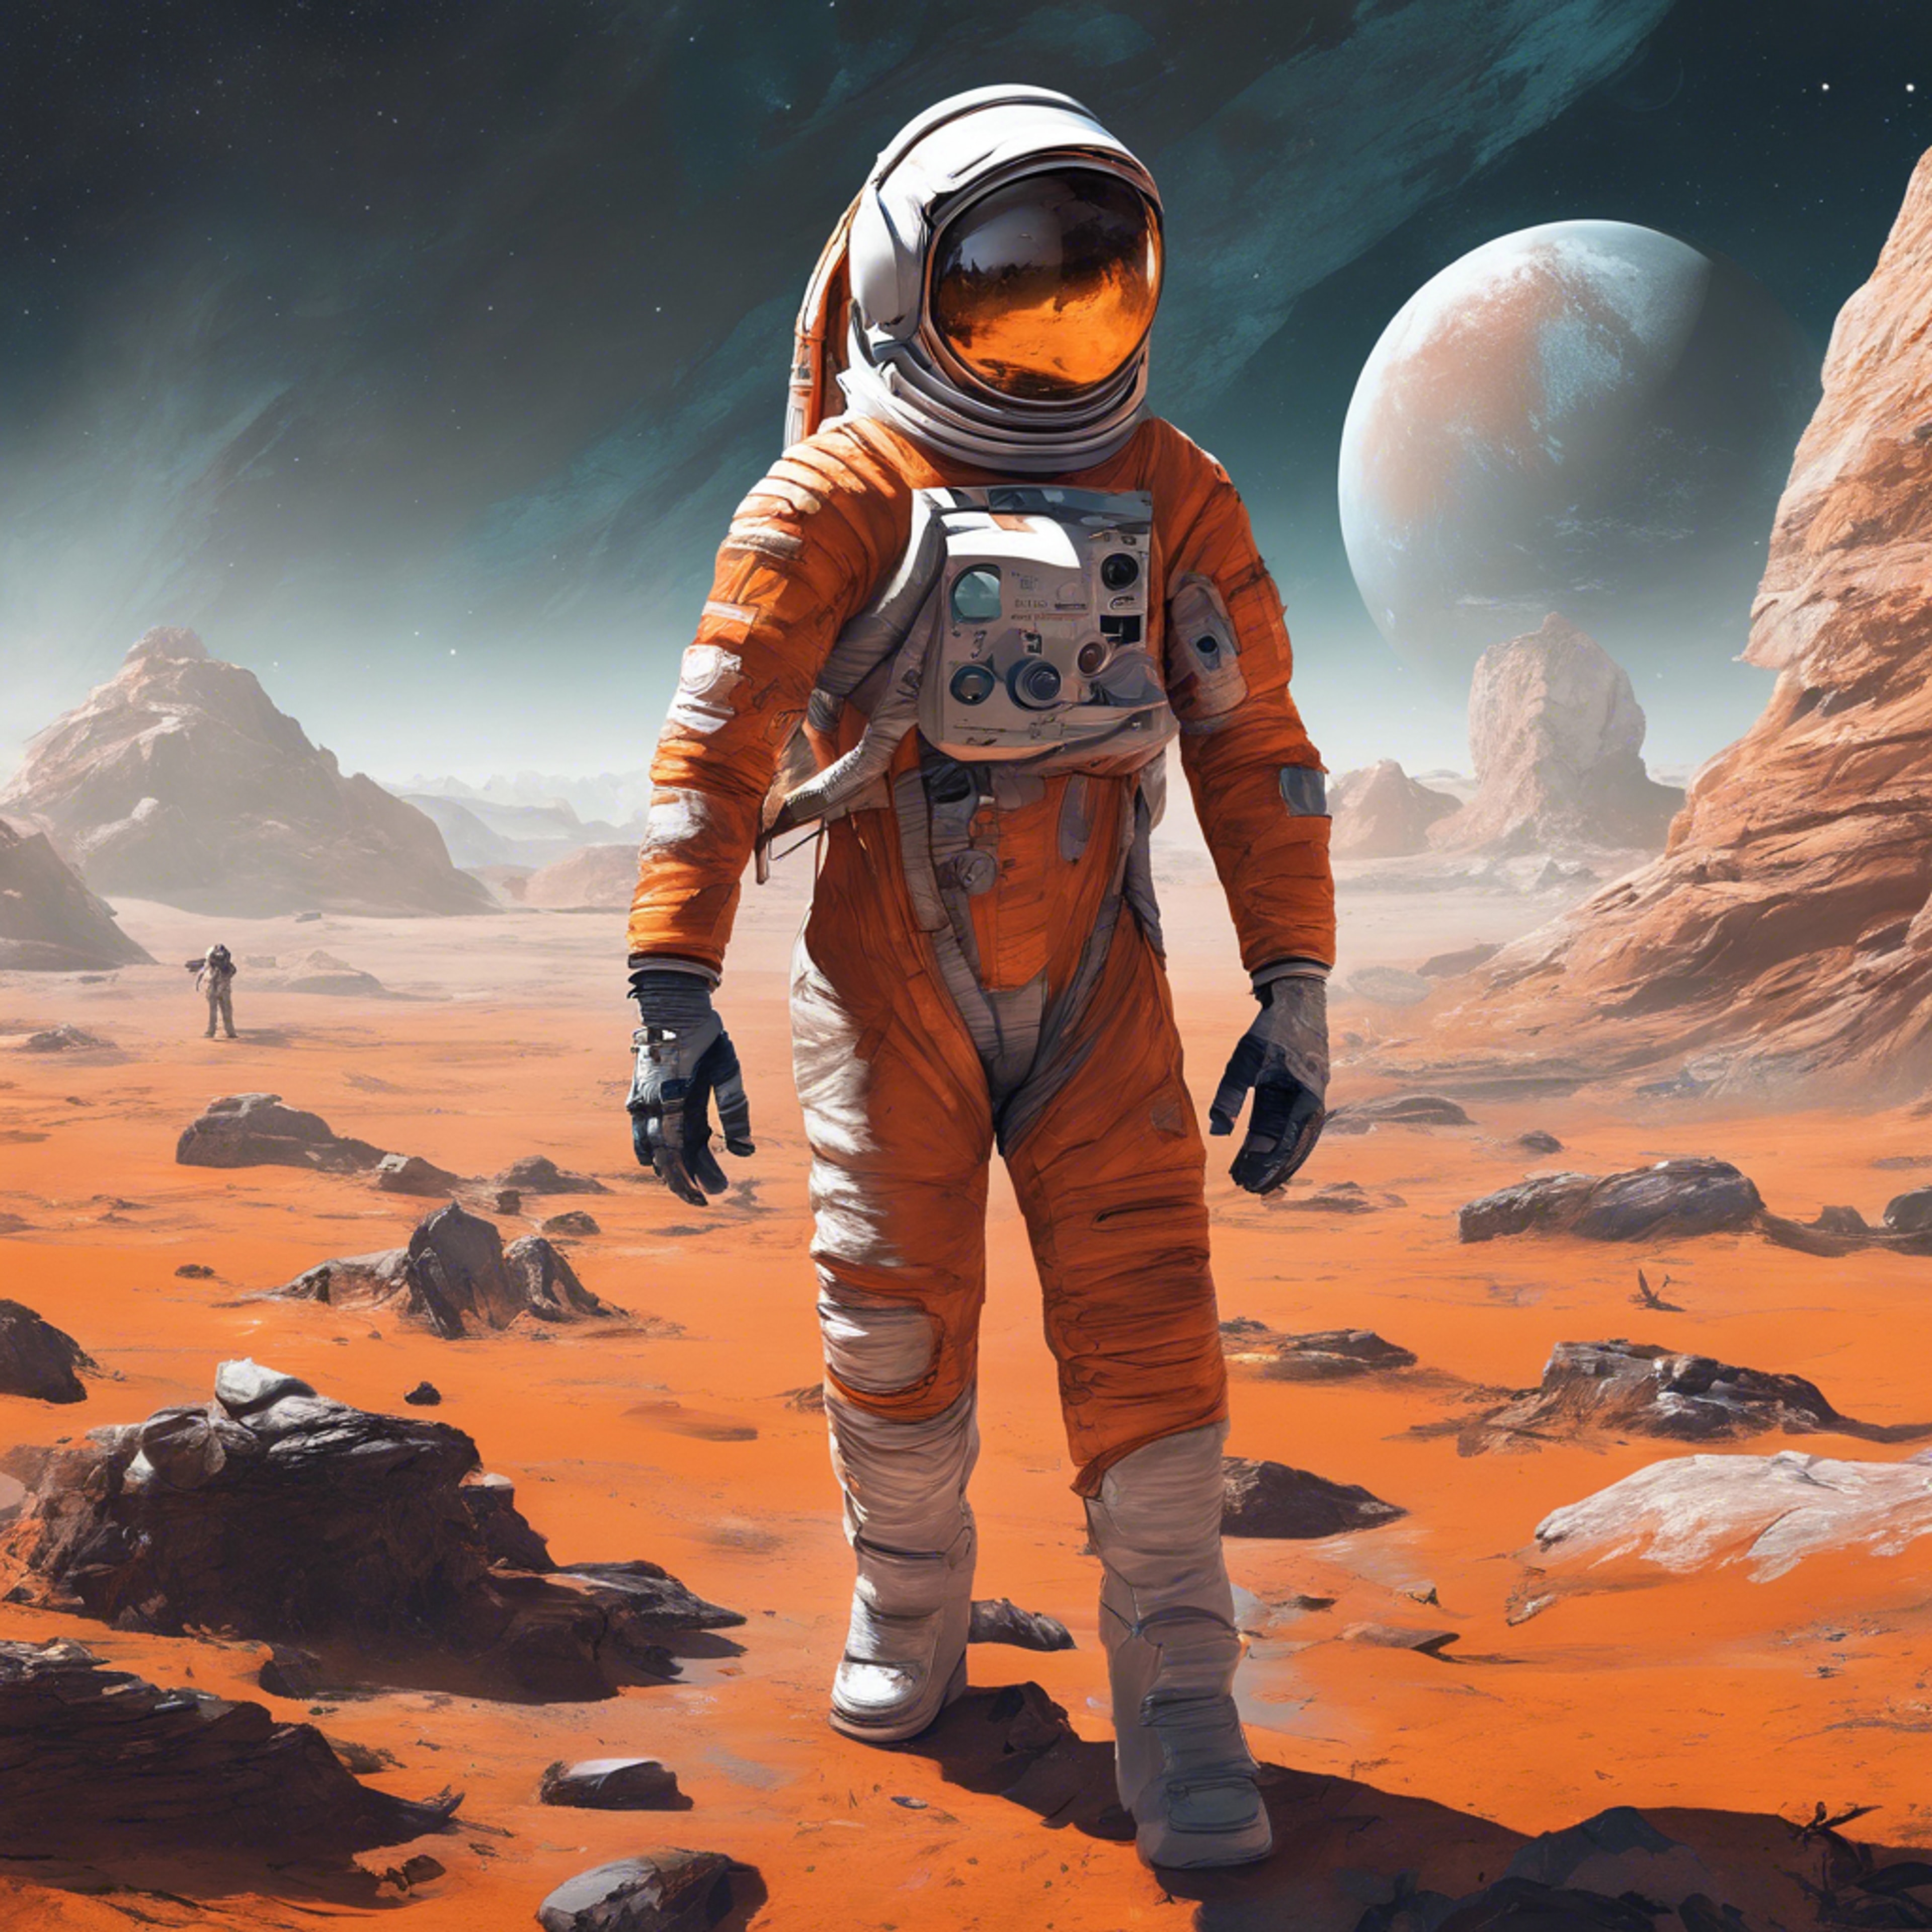 A space-themed video game featuring an astronaut in an orange and white suit exploring an alien planet. Kertas dinding[5d2c49abc07a4c83ad01]